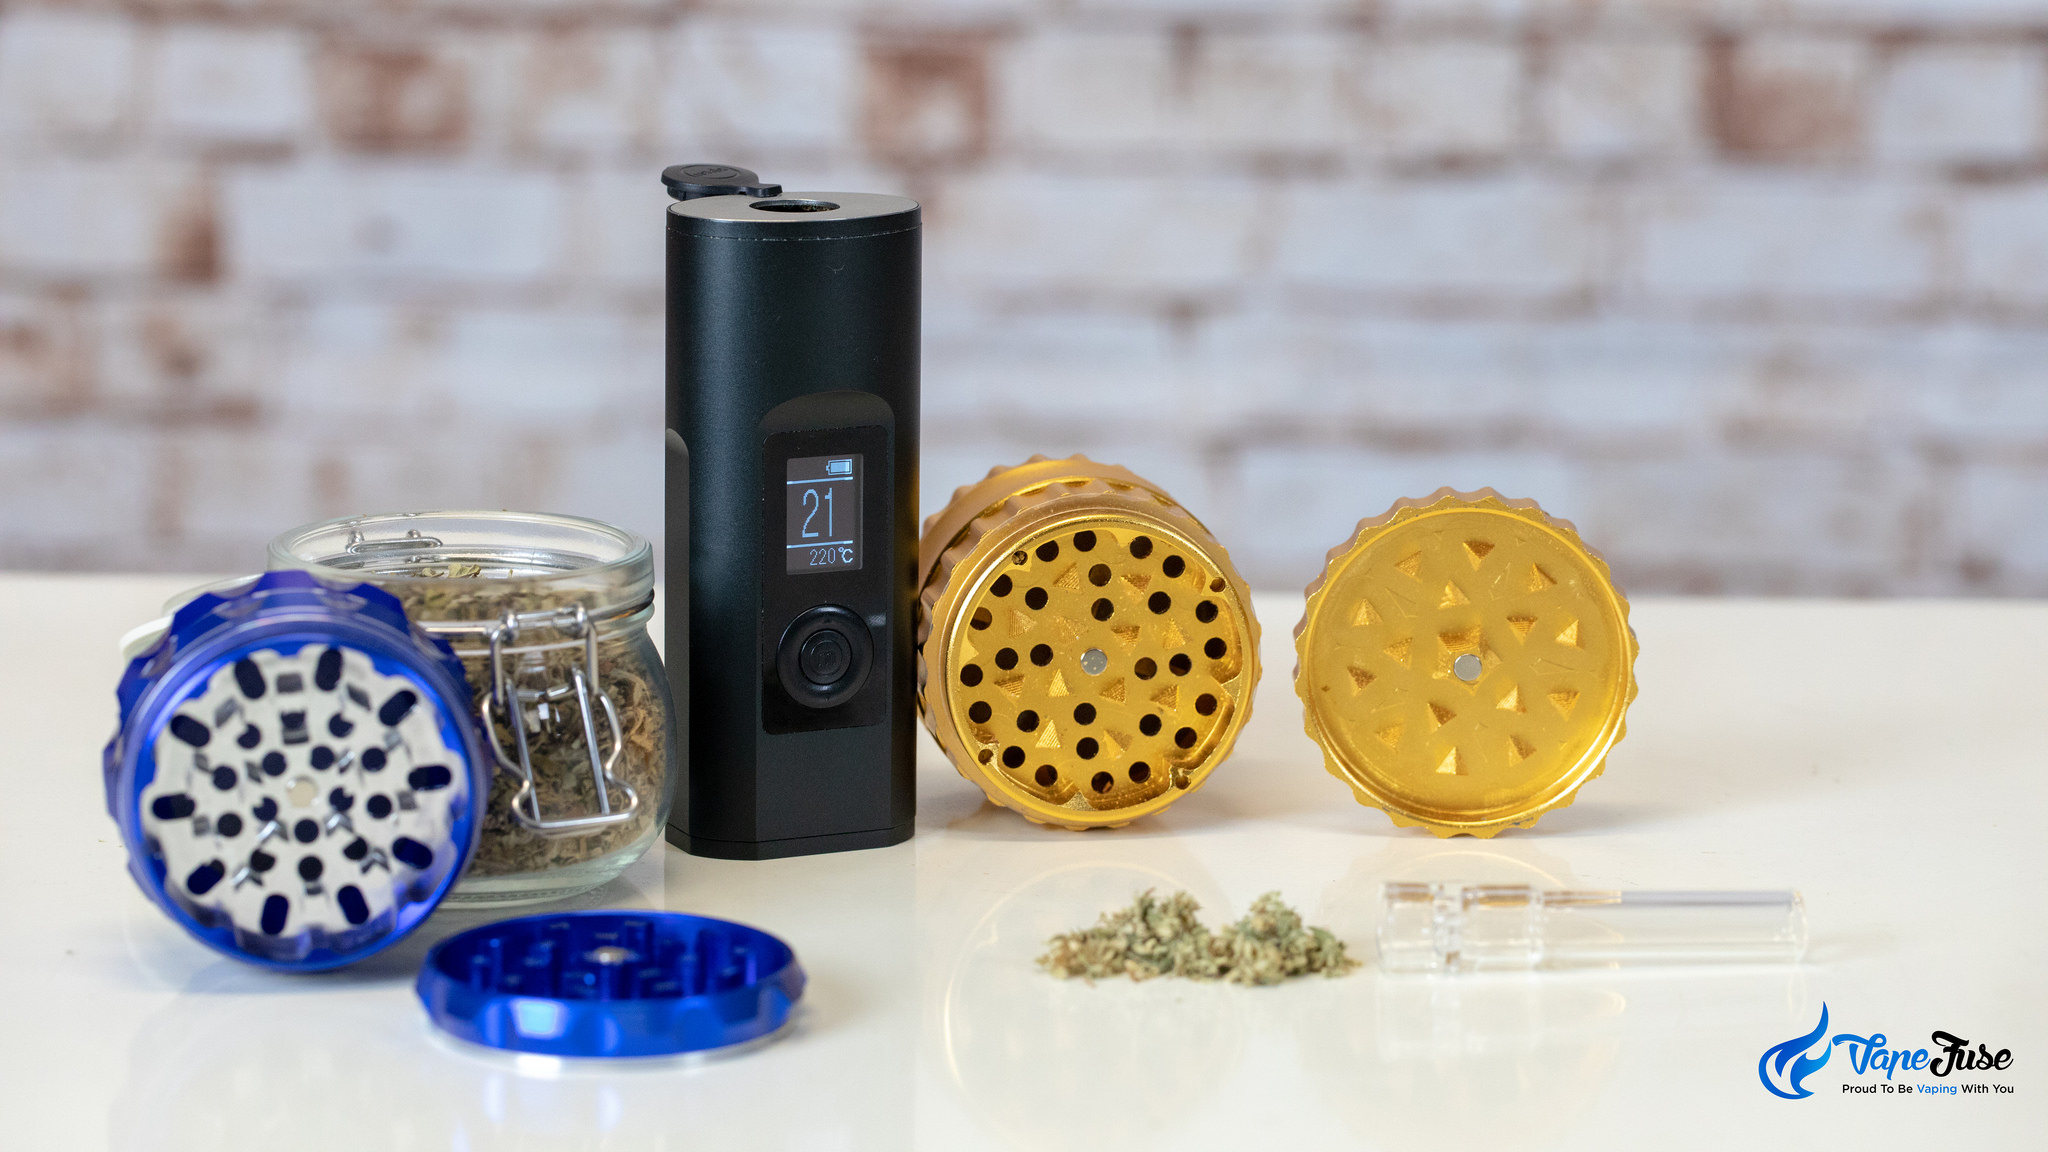 Arizer Solo II portable vaporizer with herb grinders